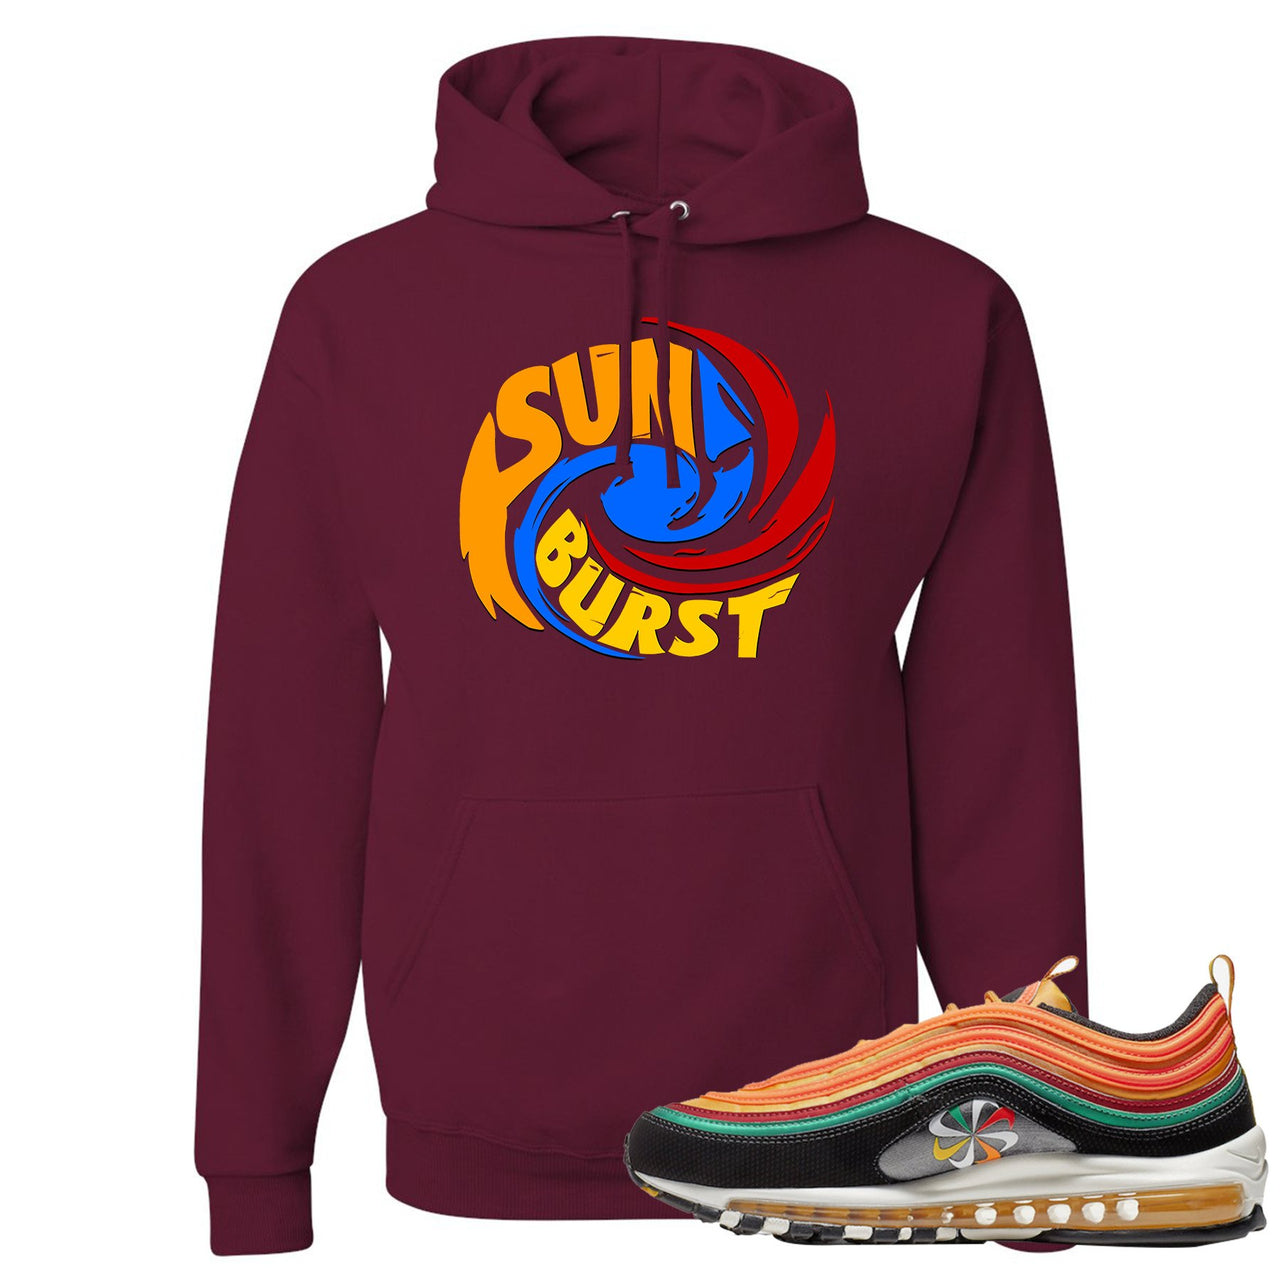 Printed on the front of the Air Max 97 Sunburst maroon sneaker matching pullover hoodie is the Sunburst hurricane logo